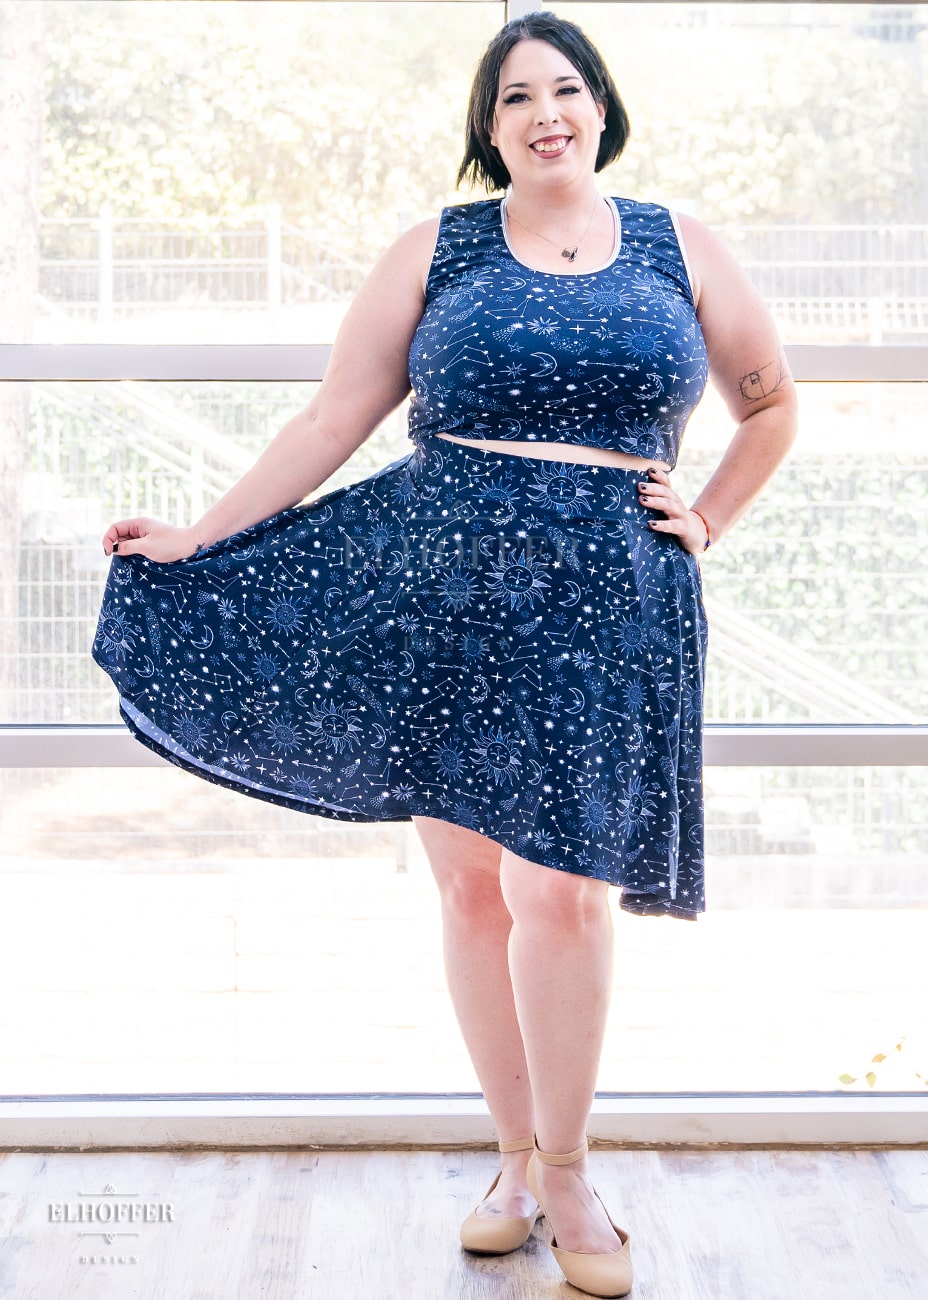 Katie Lynn is a size 2XL model with fair skin and short dark hair. She is wearing a high low skirt that hits the back of her knees with pockets and a two inch elastic covered waistband. The Star-Crossed Lovers print is a celestial inspired pattern featuring a navy base and white stars, constellations, sunds, moons, and other small details scattered across the repeated art.